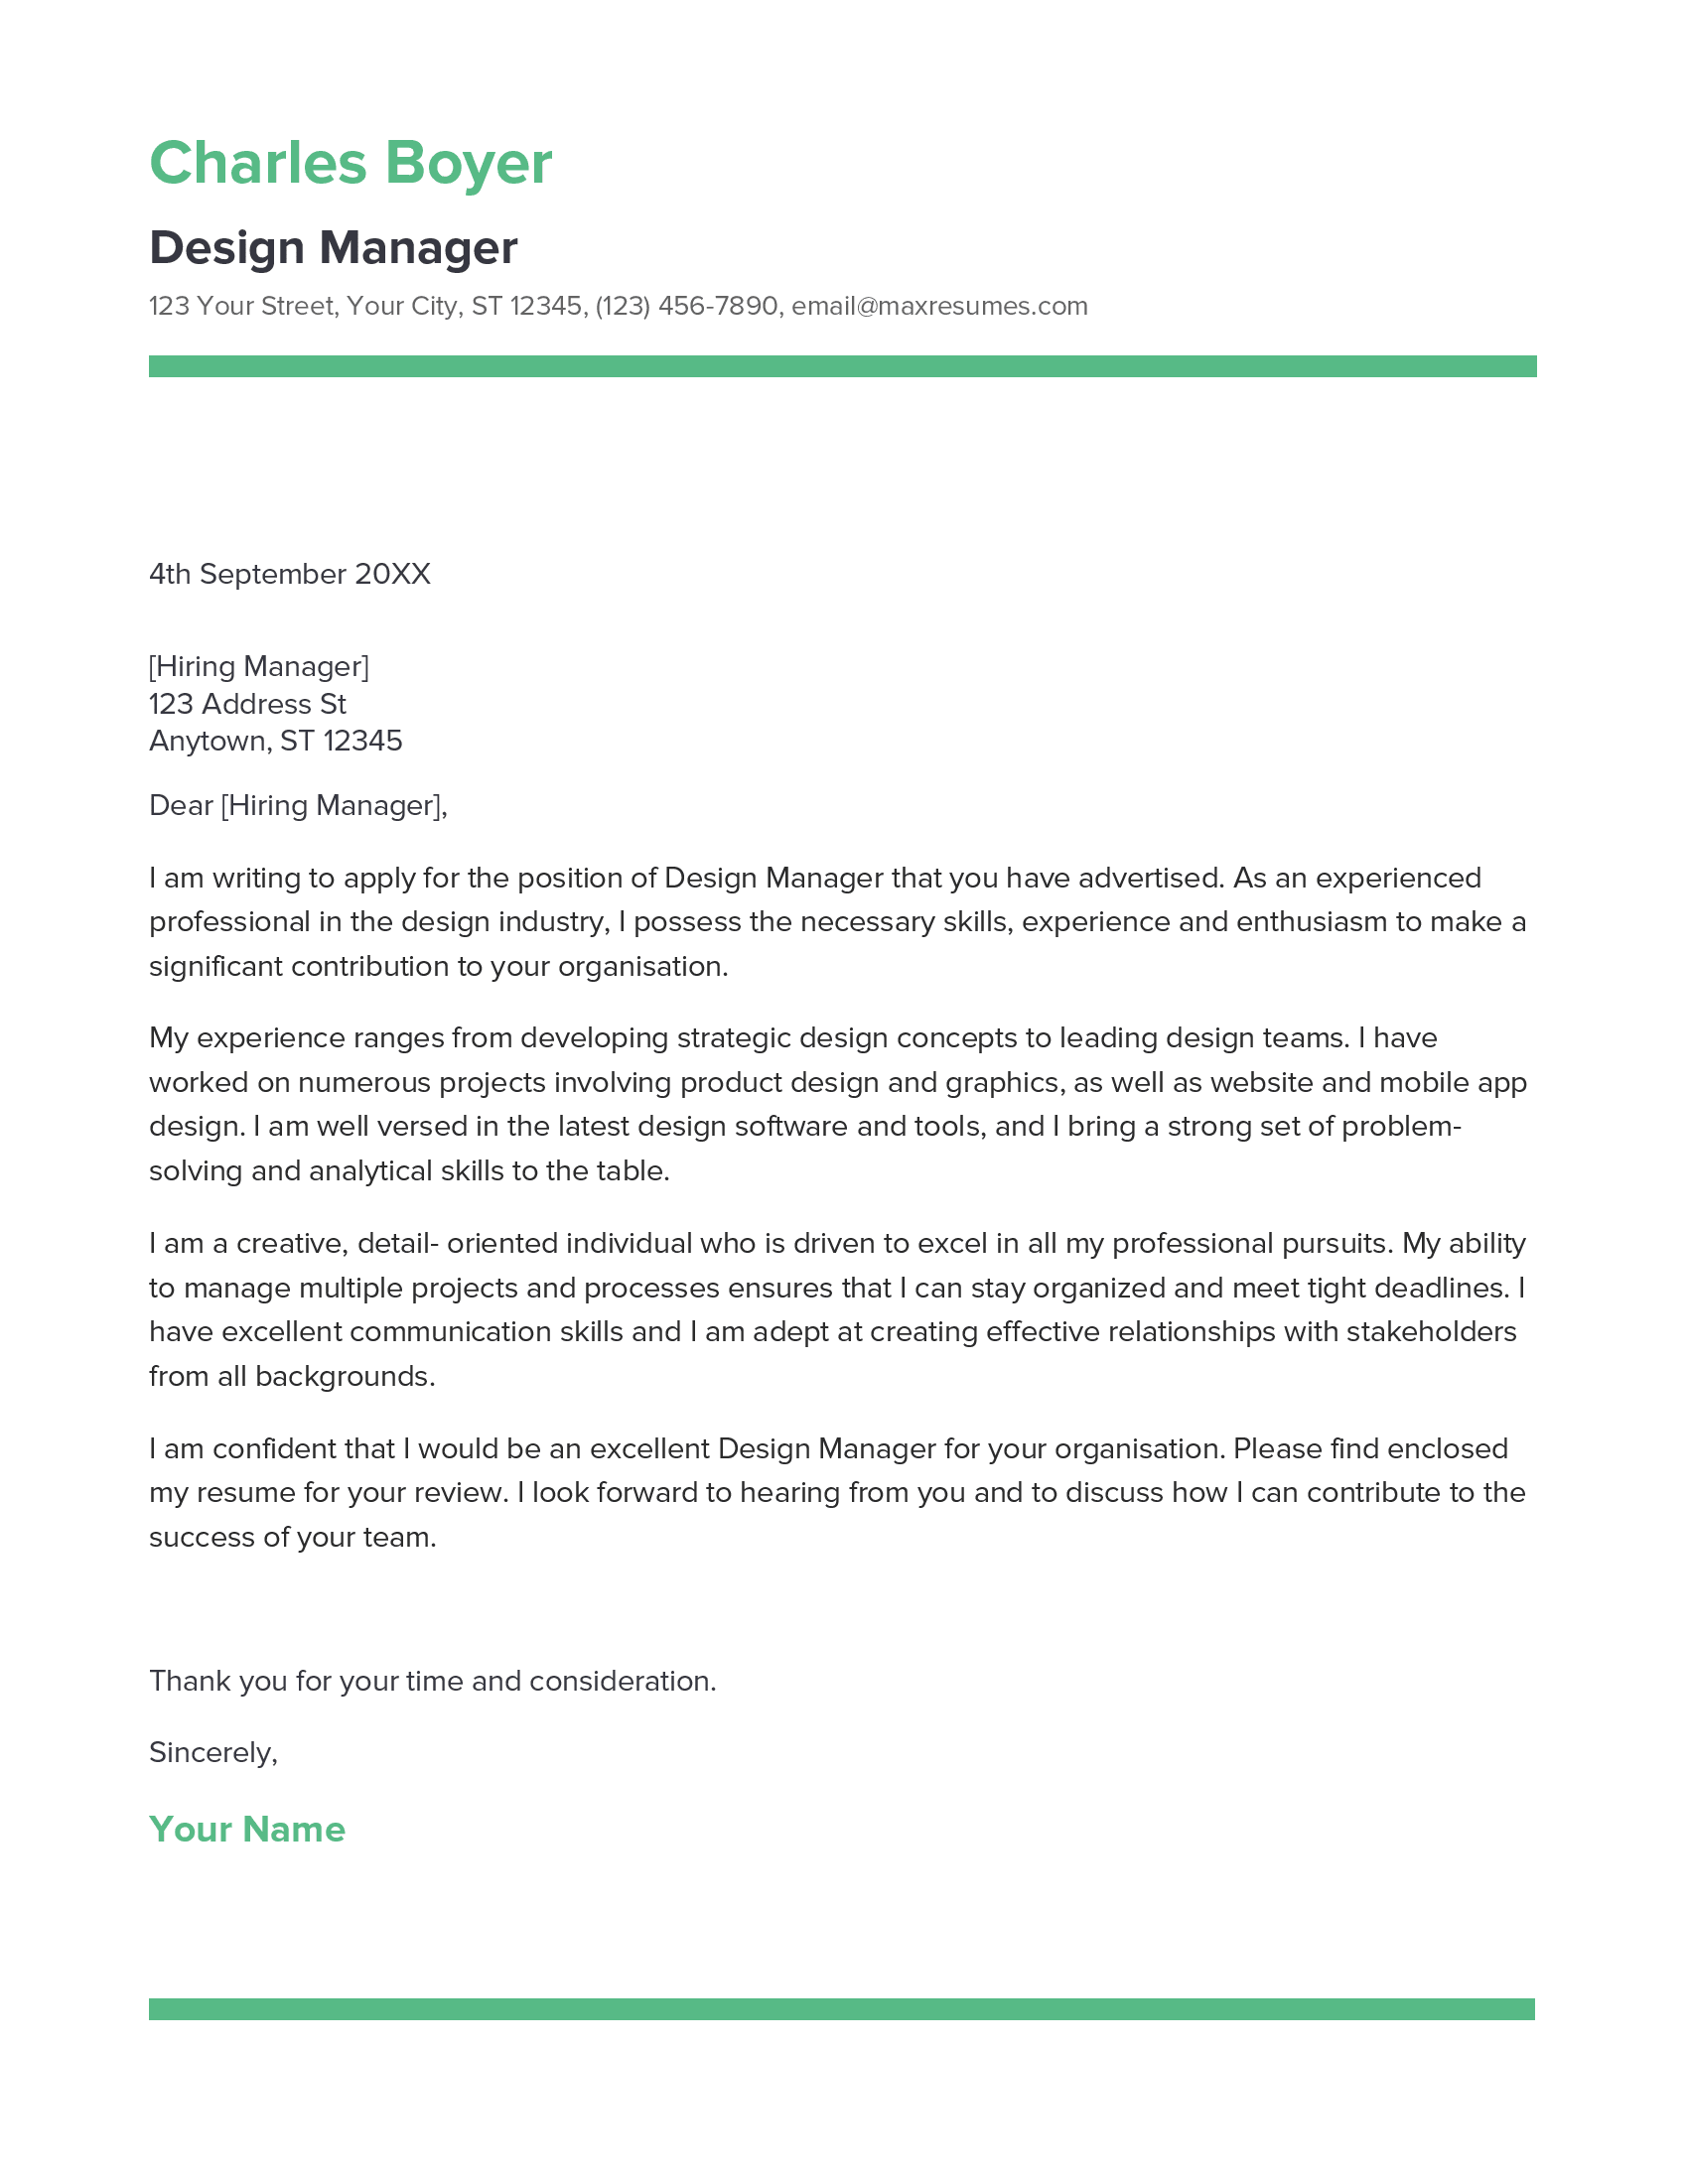 graphic design manager cover letter